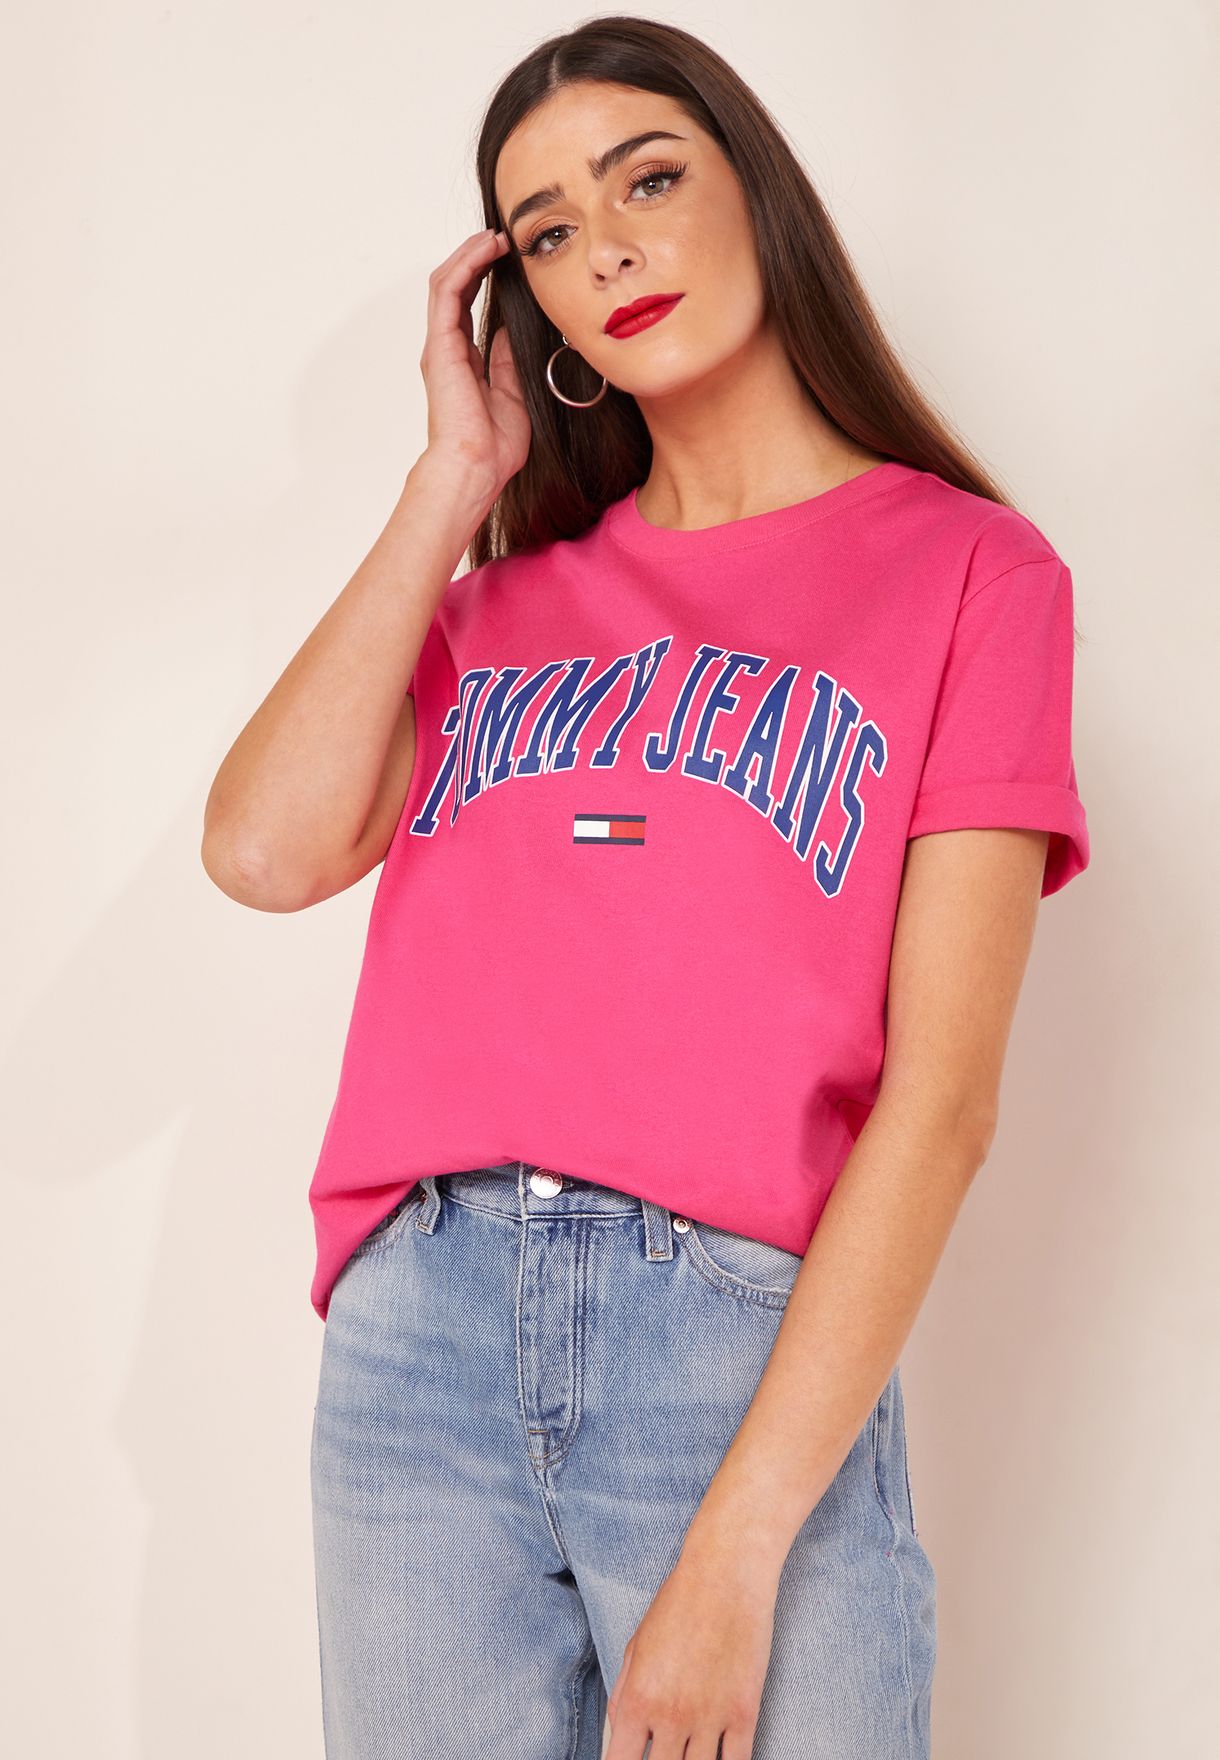 tommy jeans pink t shirt